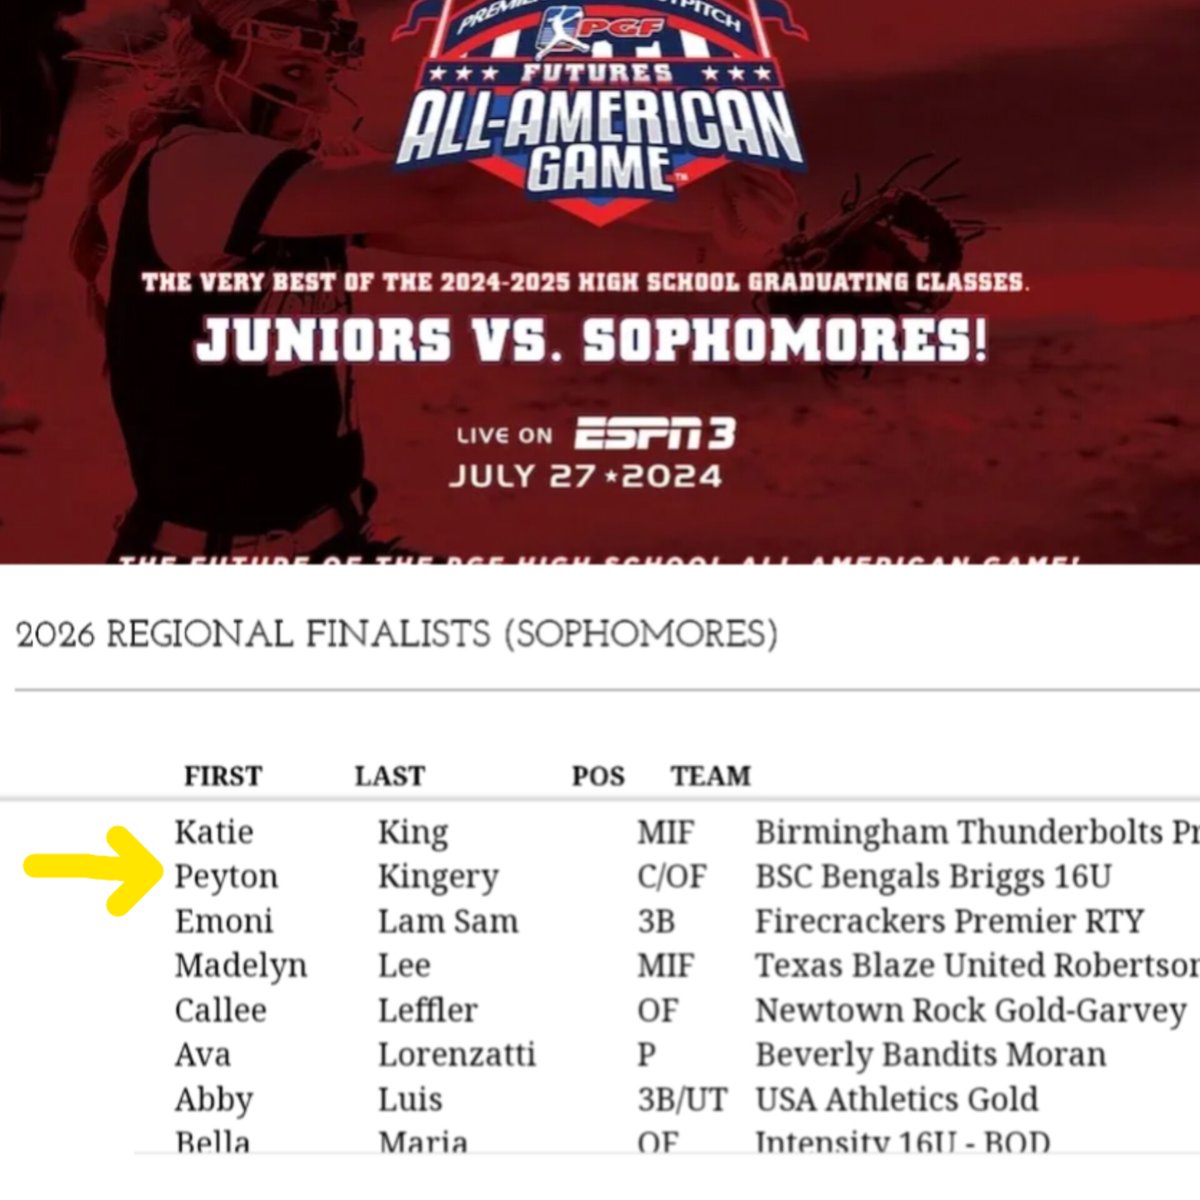 Thank you @PGFnetwork for selecting me as a 2026 Regional Finalist for the All-American Game - Juniors vs Sophomores. #PGF #softball